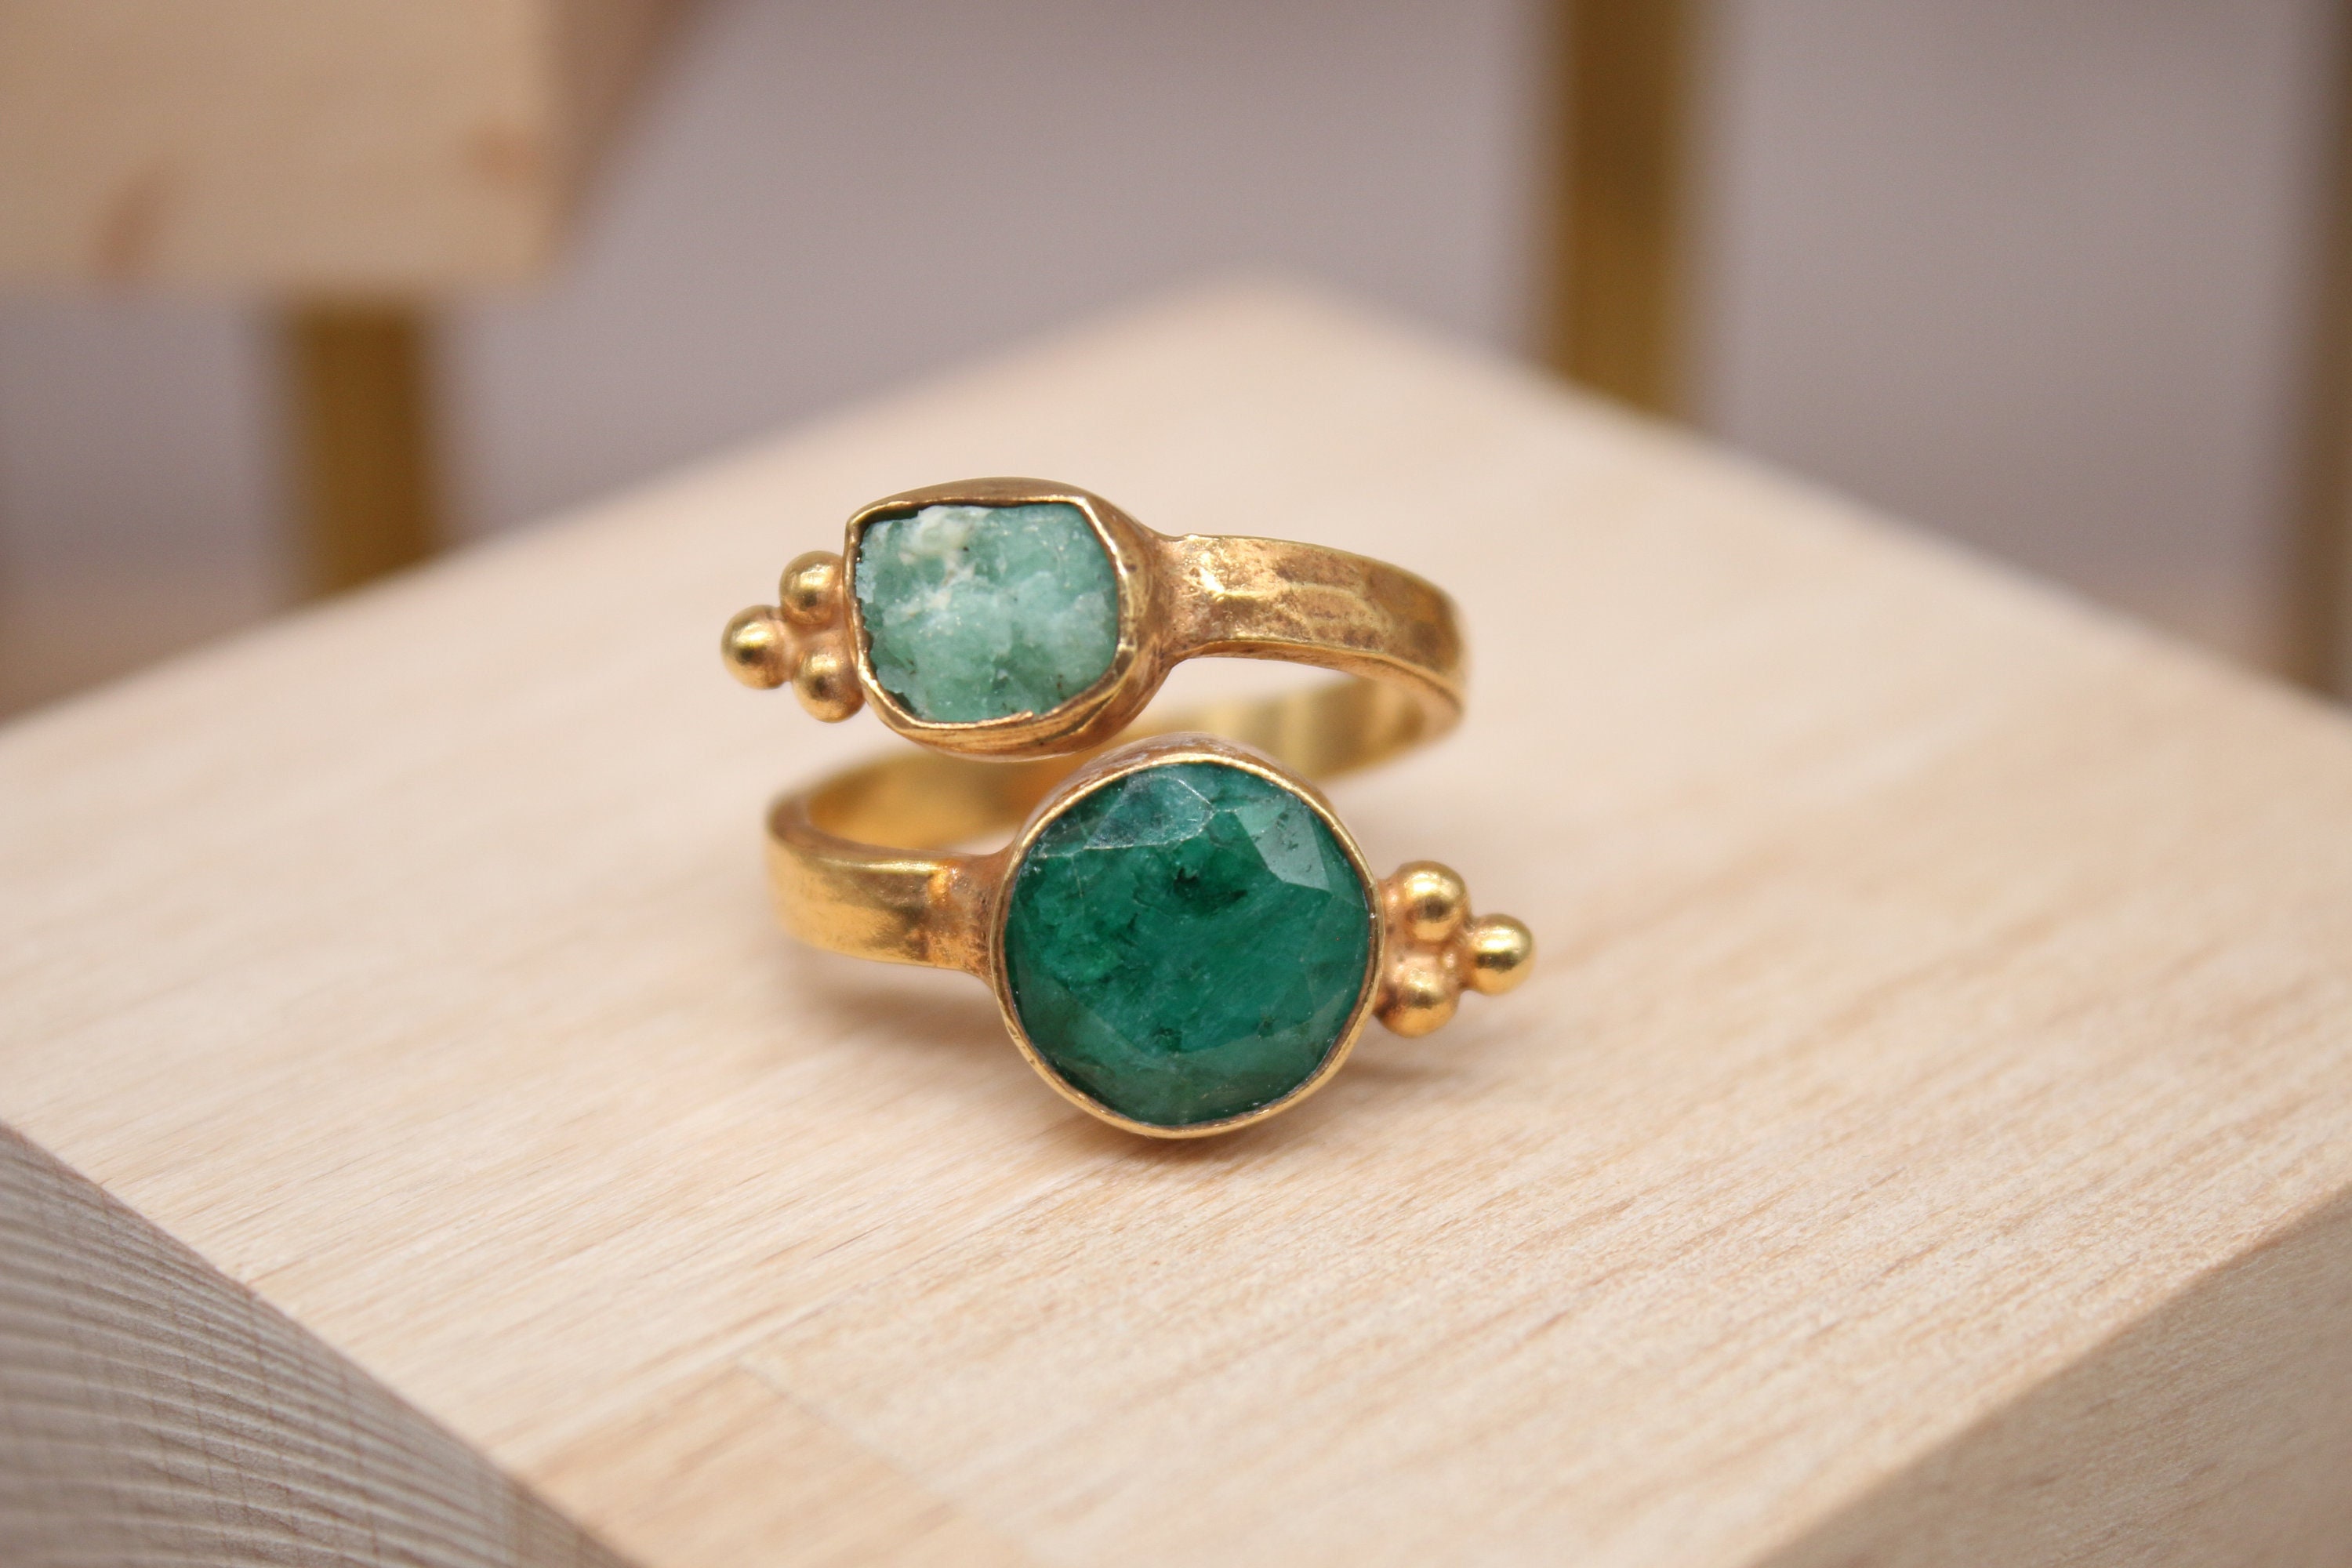 Buying an Emerald Engagement Ring | With Clarity